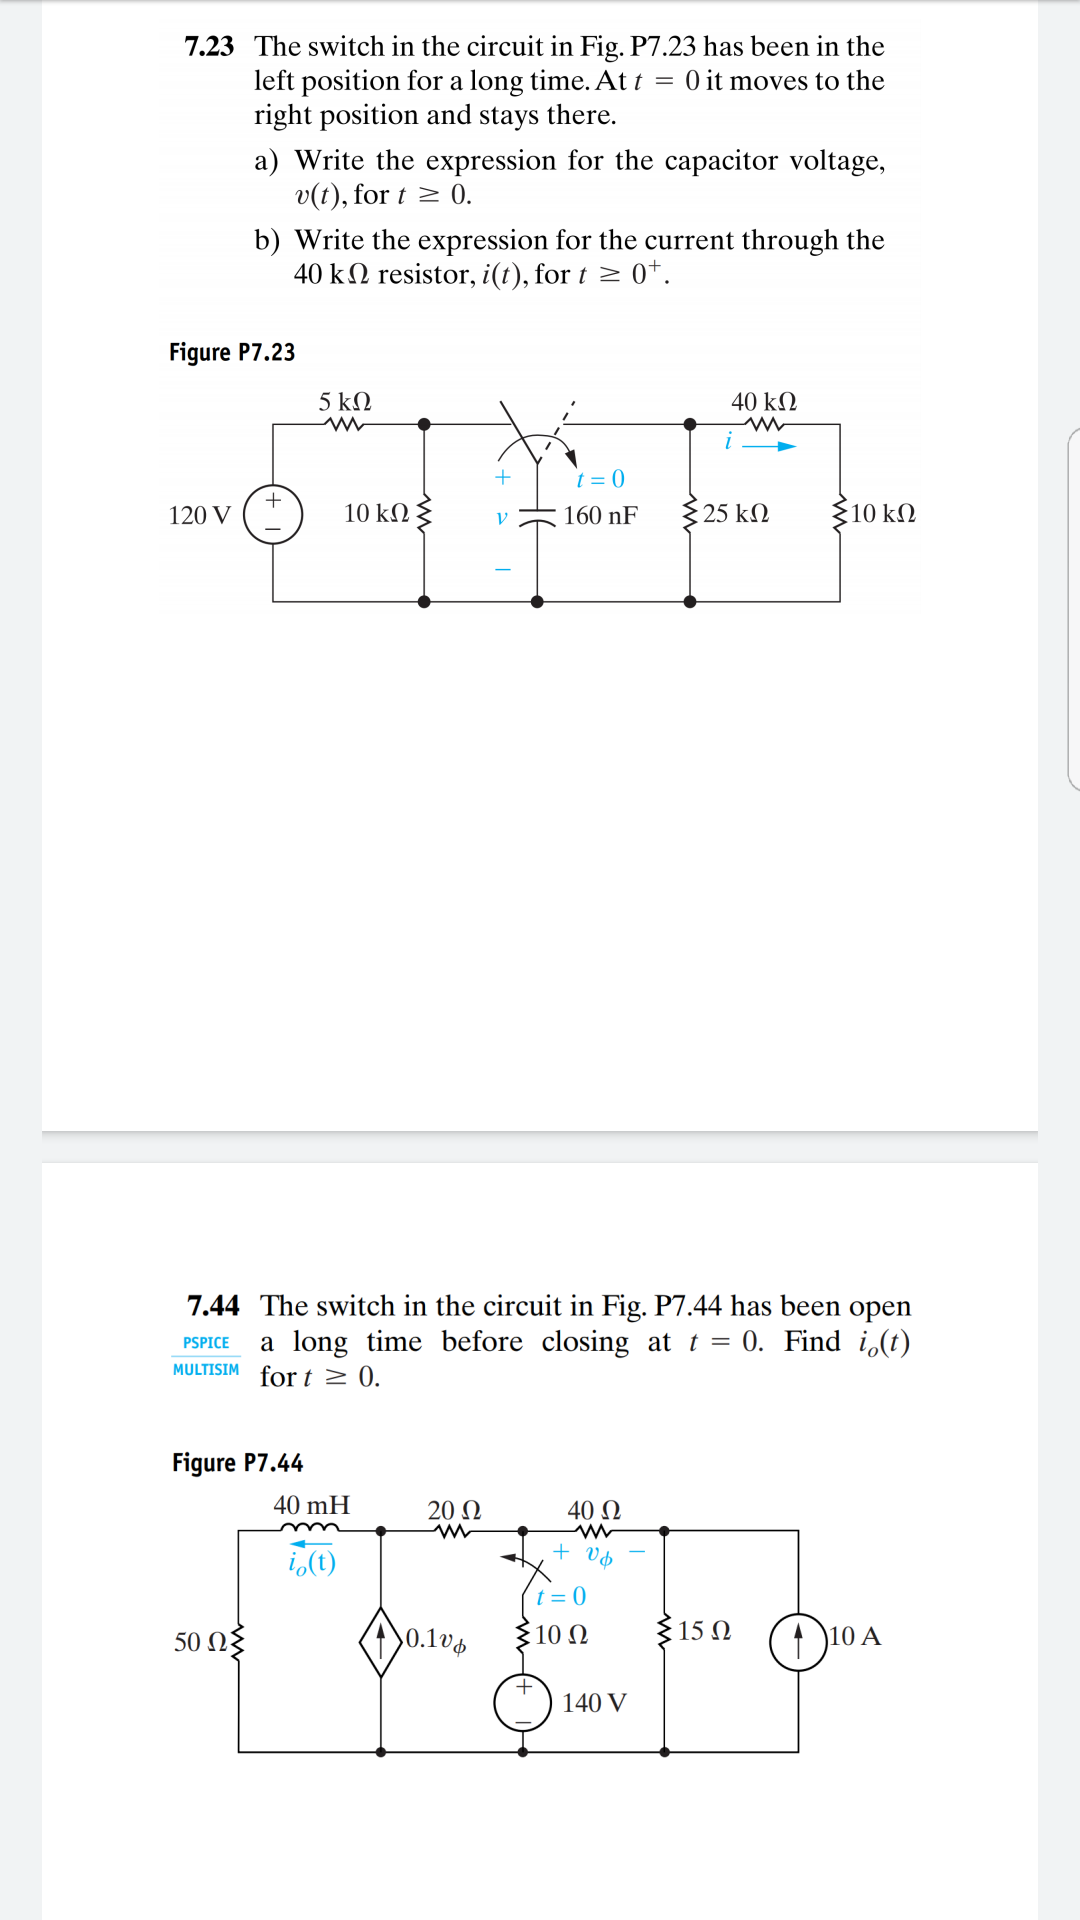 7.23 The switch in the circuit in Fig. P7.23 has been in the
left position for a long time. At t
right position and stays there.
O it moves to the
a) Write the expression for the capacitor voltage,
v(t), for t > 0.
b) Write the expression for the current through the
40 kN resistor, i(t), for t > 0*.
Figure P7.23
5 ΚΩ
40 kΩ
t = 0
120 V
10 kΩ
160 nF
{25 k
ξ10 kΩ
7.44 The switch in the circuit in Fig. P7.44 has been open
a long time before closing at t = 0. Find i,(t)
PSPICE
MULTISIM for t > 0.
Figure P7.44
40 mH
20 Ω
40 N
i,(t)
+ Vý
t = 0
50 Ωξ
>0.1v
310 N
{15 N
1 )10 A
140 V
